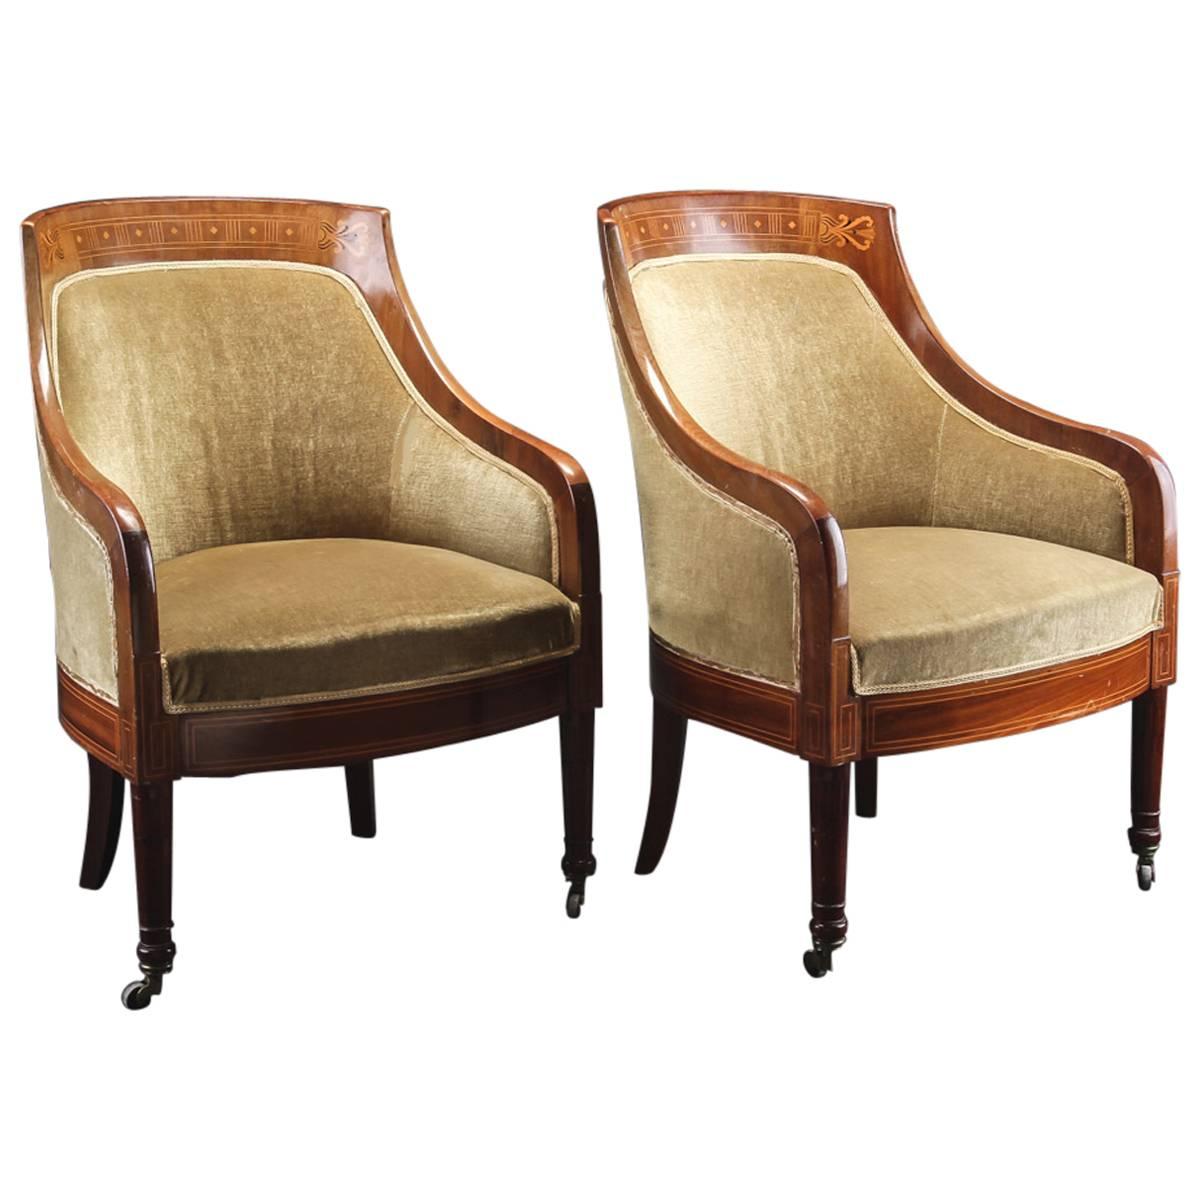 Pair of Swedish Mahogany Art Deco Bergere Chairs with Marquetry Inlay